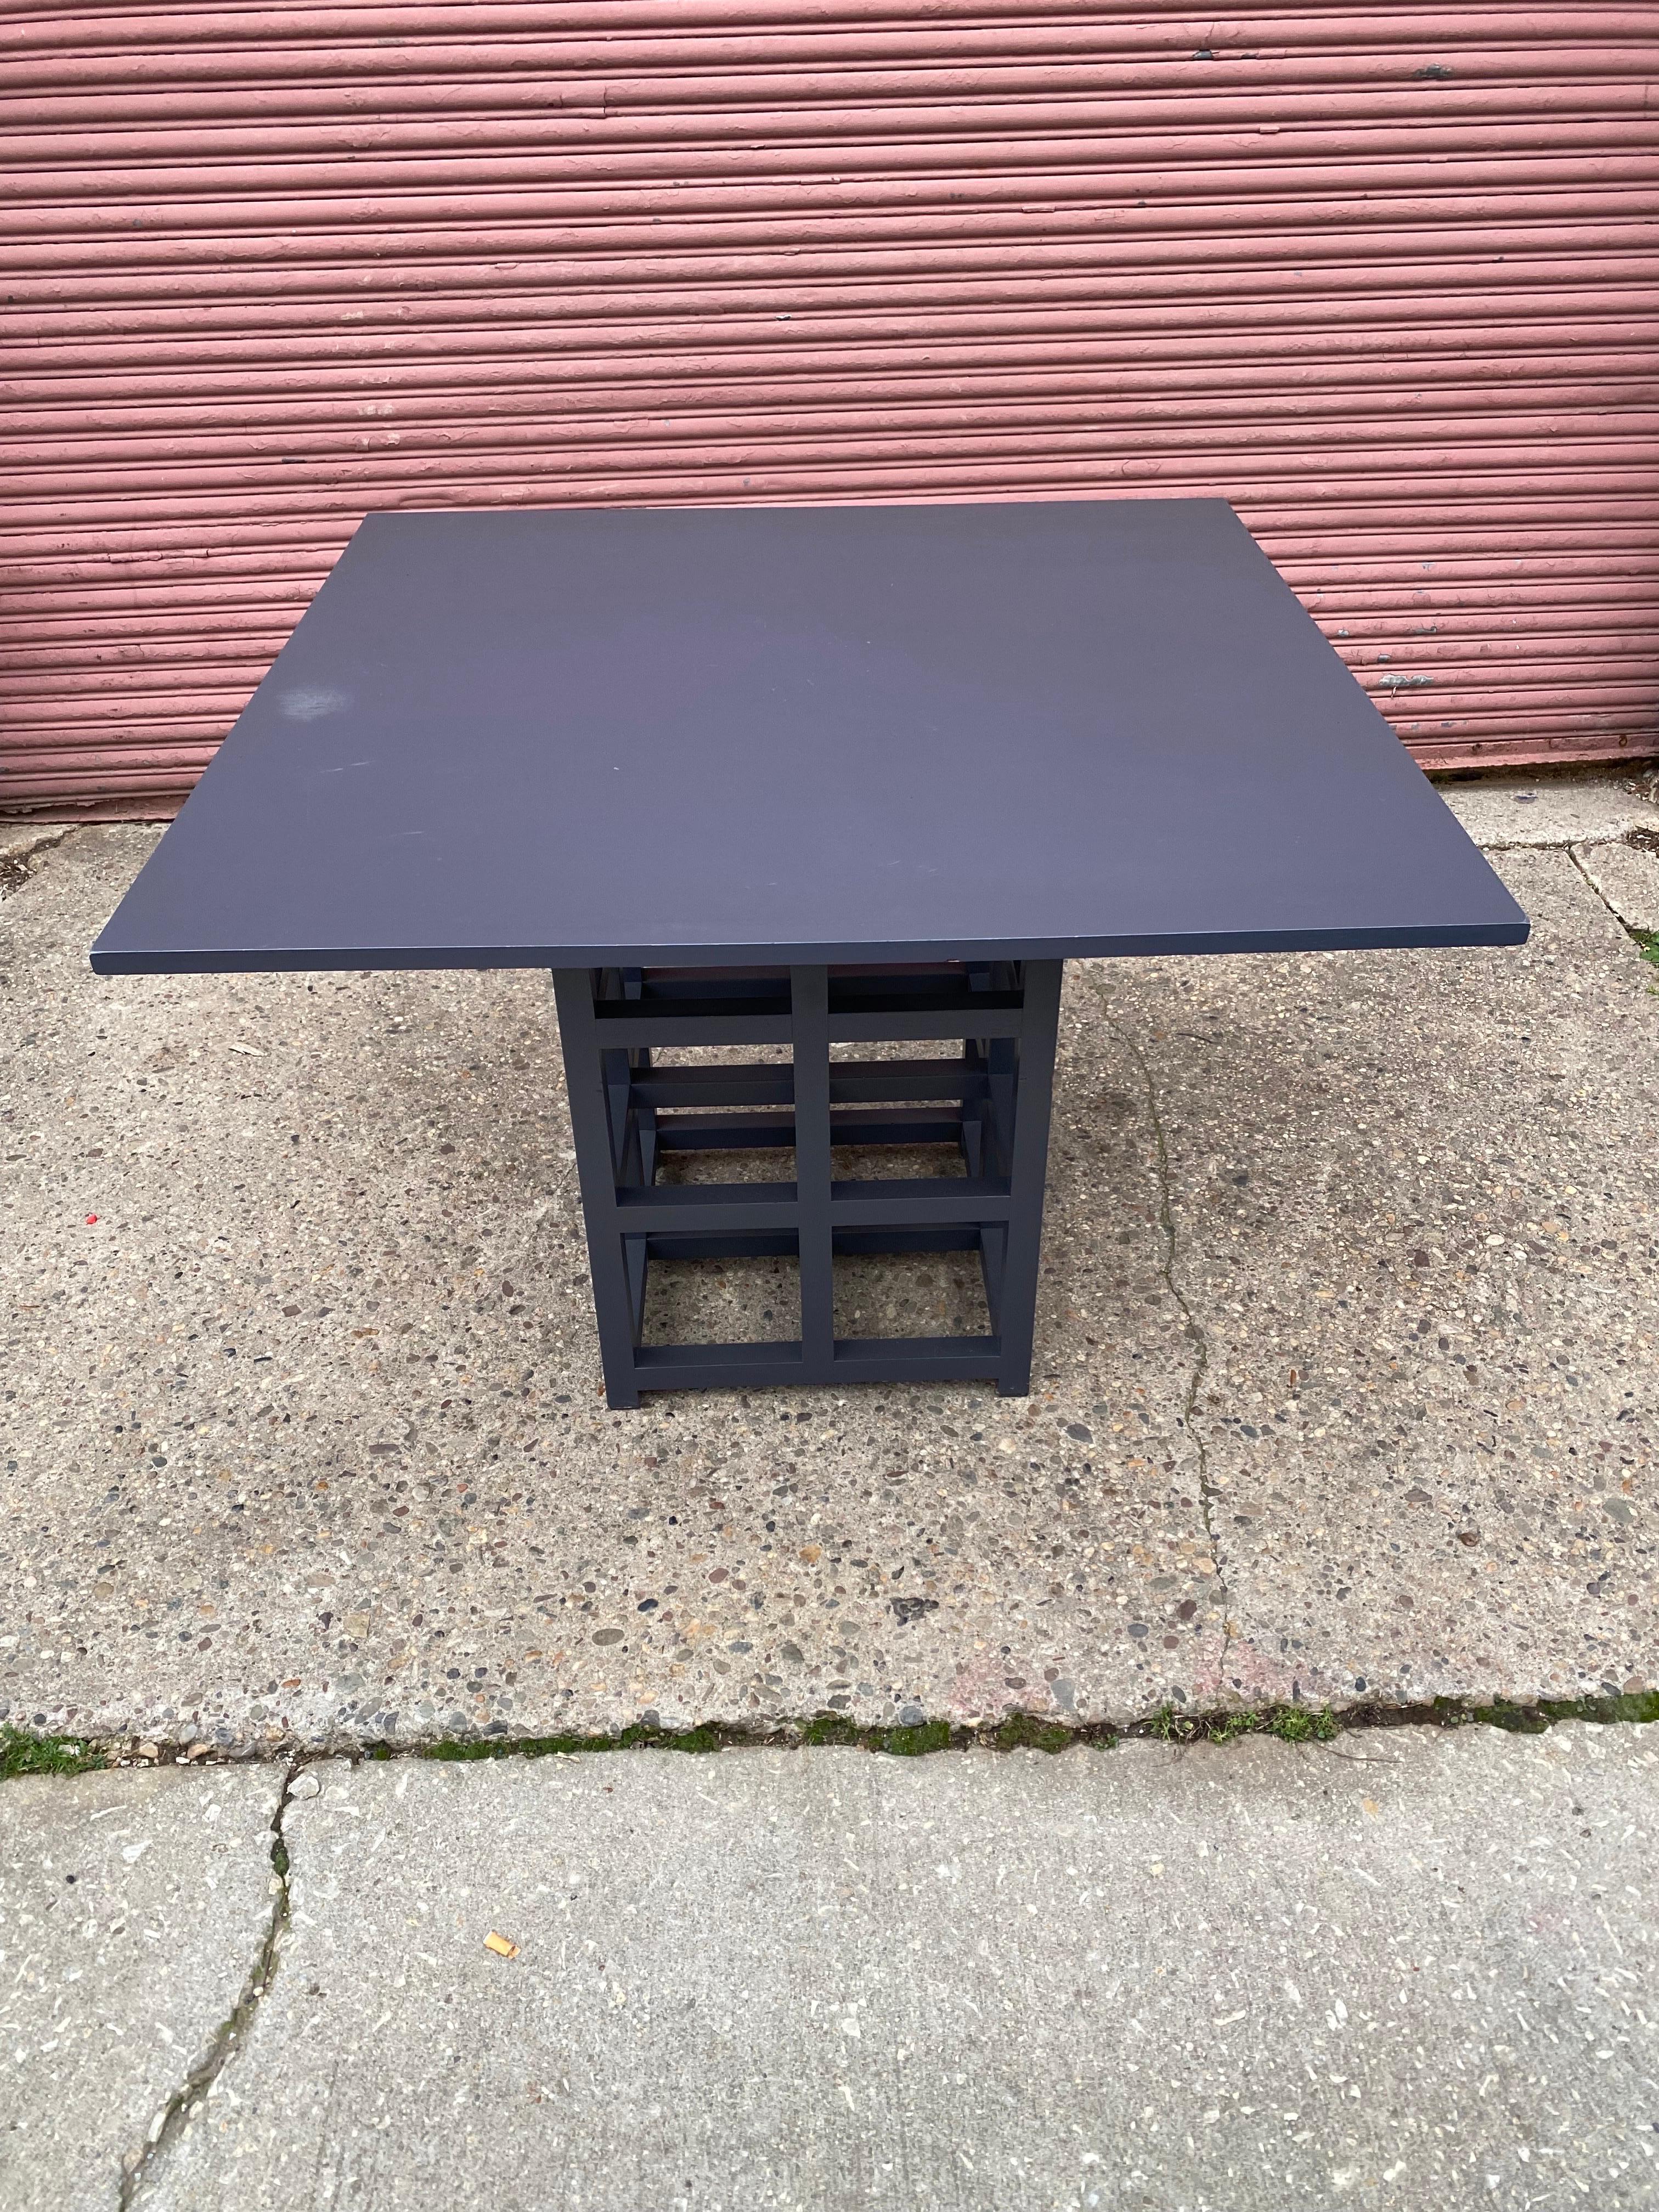 Charles Rennie Mackintosh Dining Table.  Part of the Hill House Commission.  This table dates to the late 80's and was painted gray around 2010.  Shows typical signs of wear and use.  Nice size at 39.5 square.  Nice and solid!  Not sure of maker,